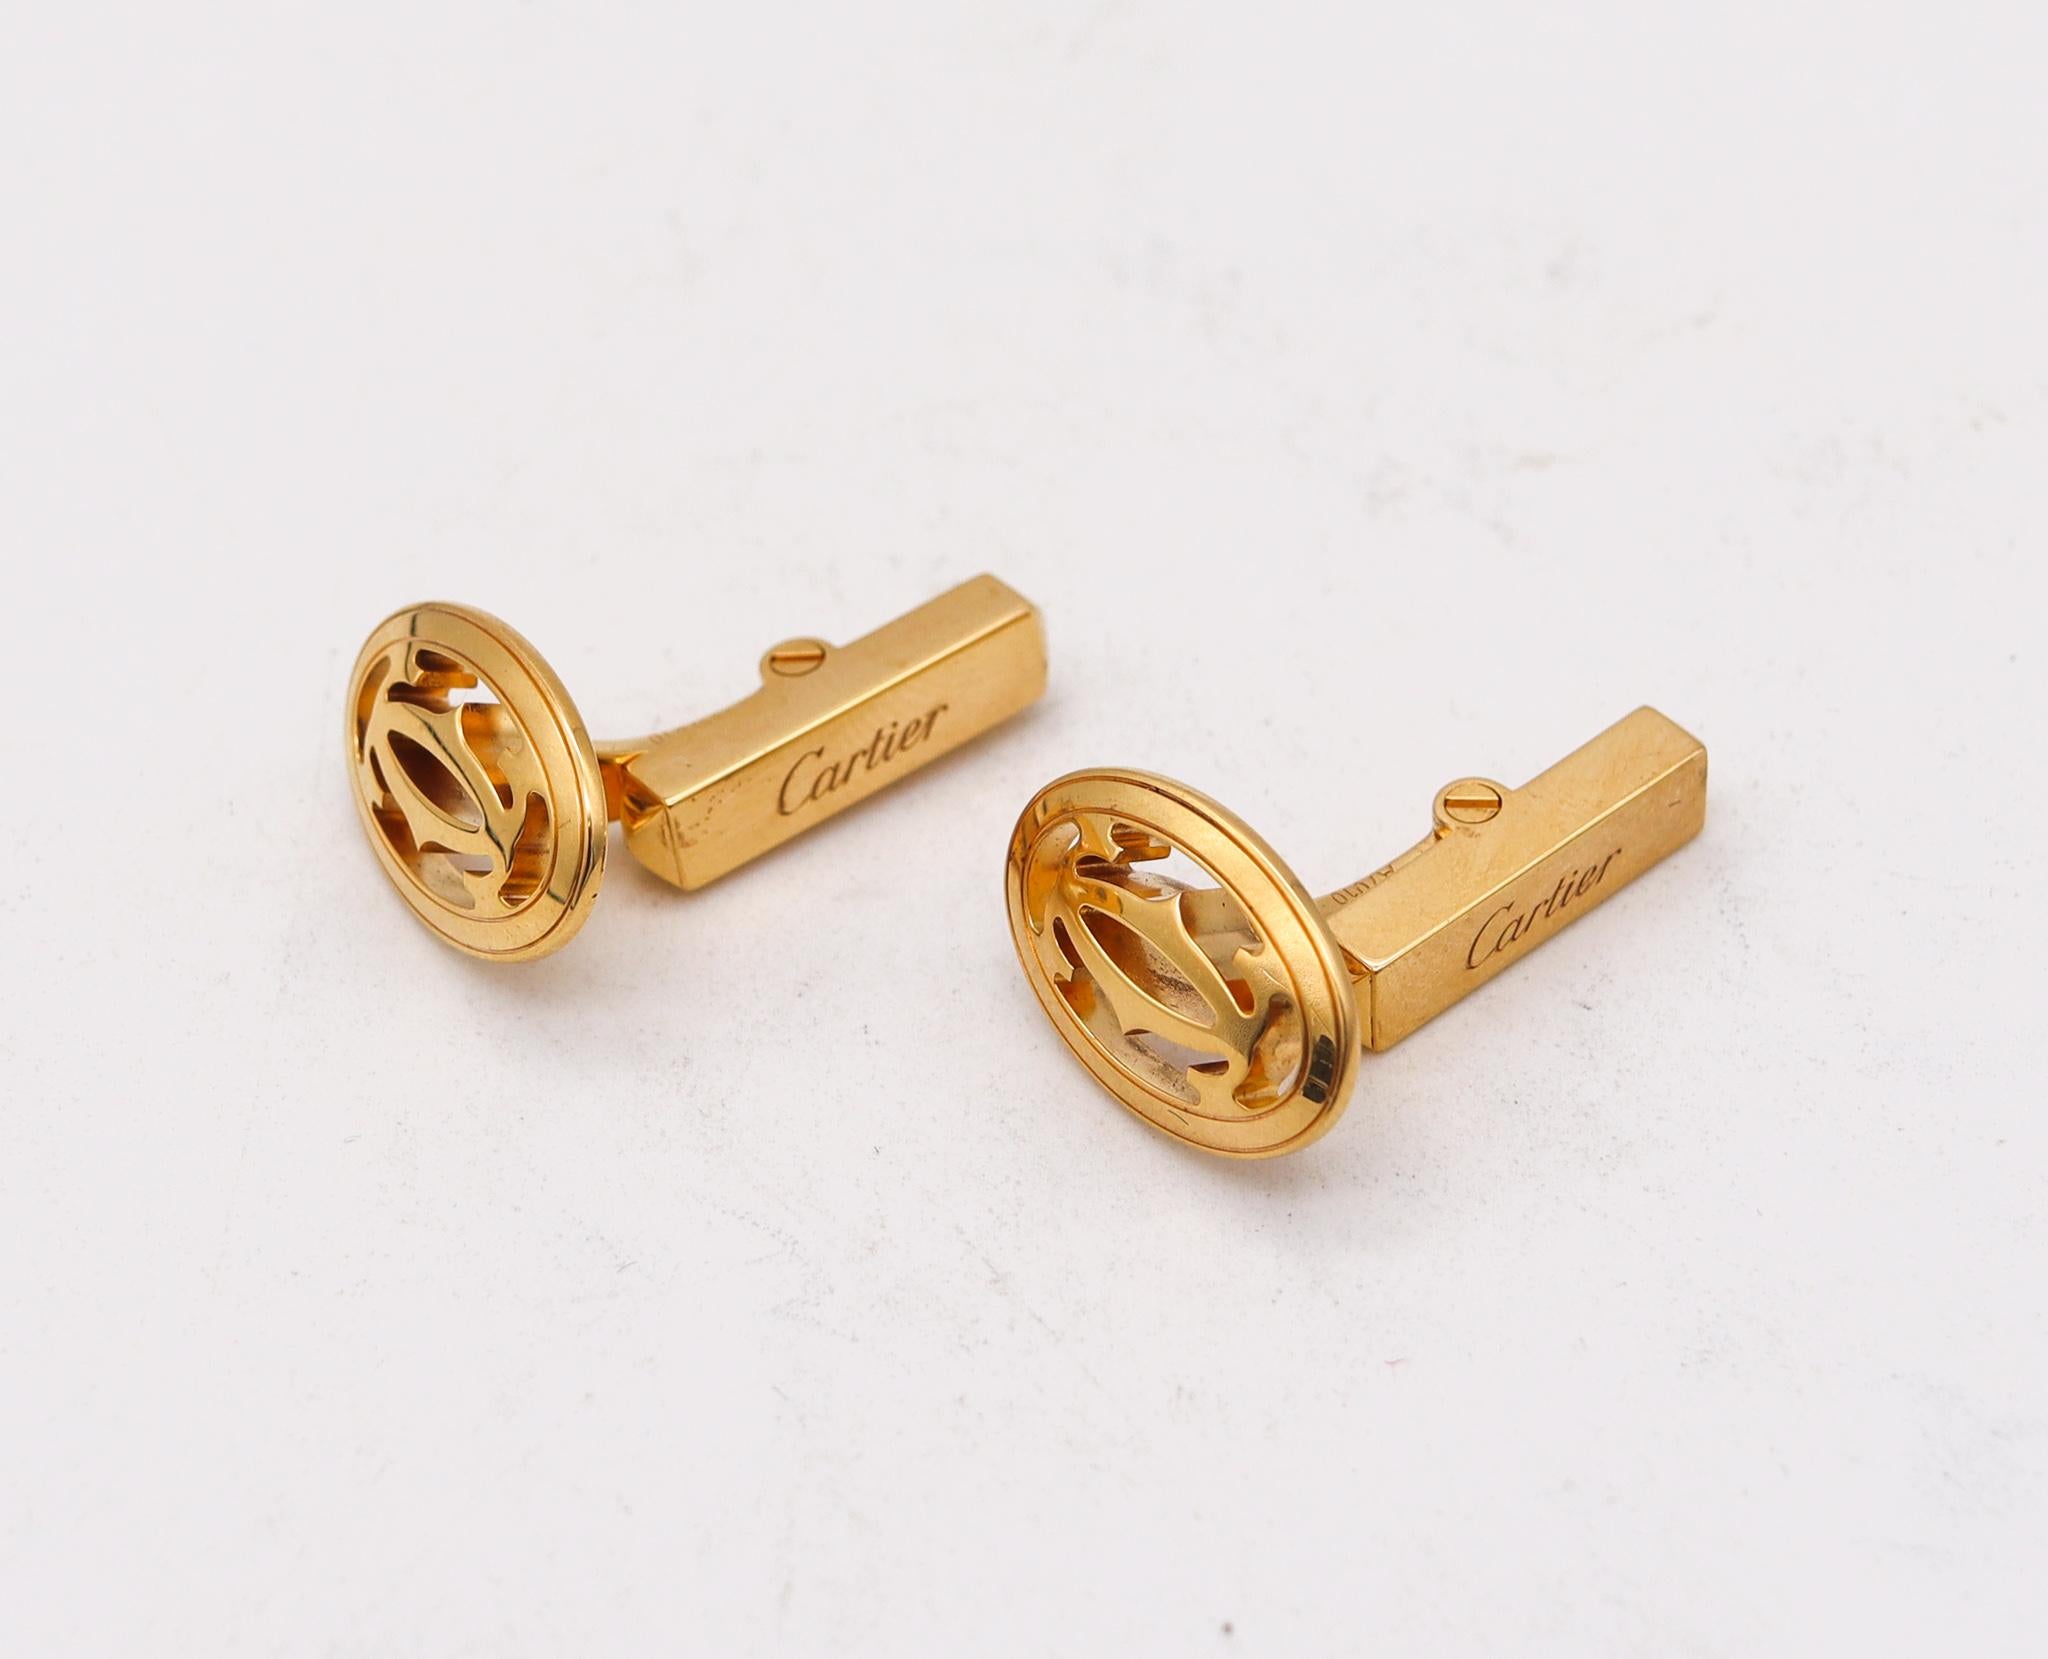 Cartier Paris Double C De Cartier Geometric Cufflinks in Solid 18 Kt Yellow Gold In Excellent Condition For Sale In Miami, FL